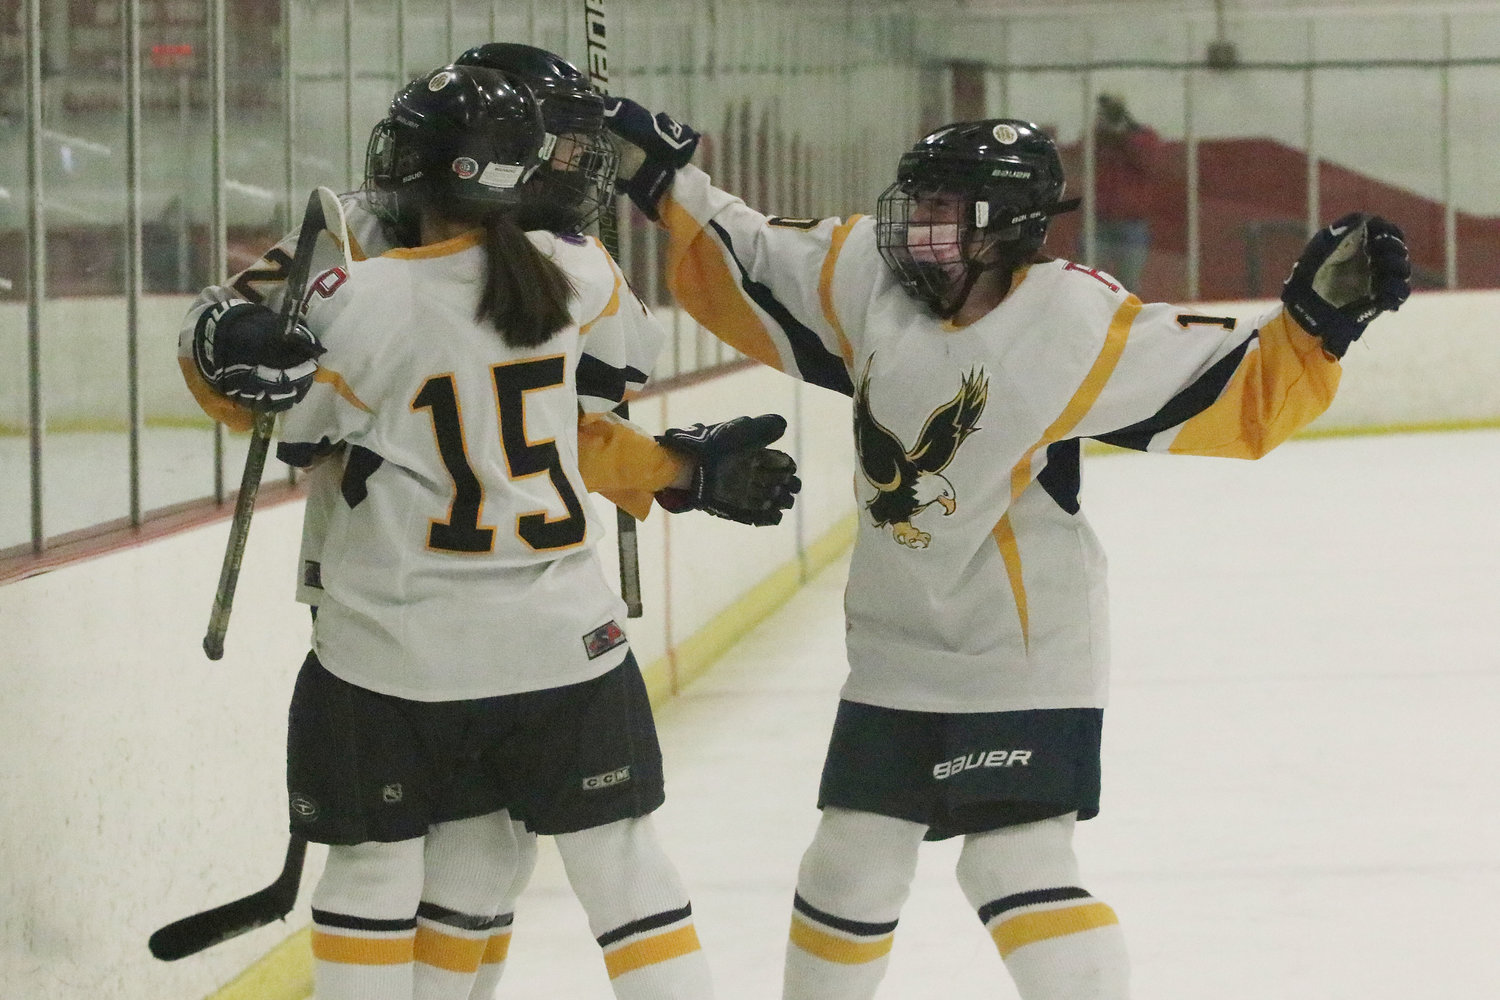 Brigid Carlin (left) and Mallory Cox (right) hug teammate Kat Barker after she scored the Eagles’ lone goal of the game in the second period of Game 2.